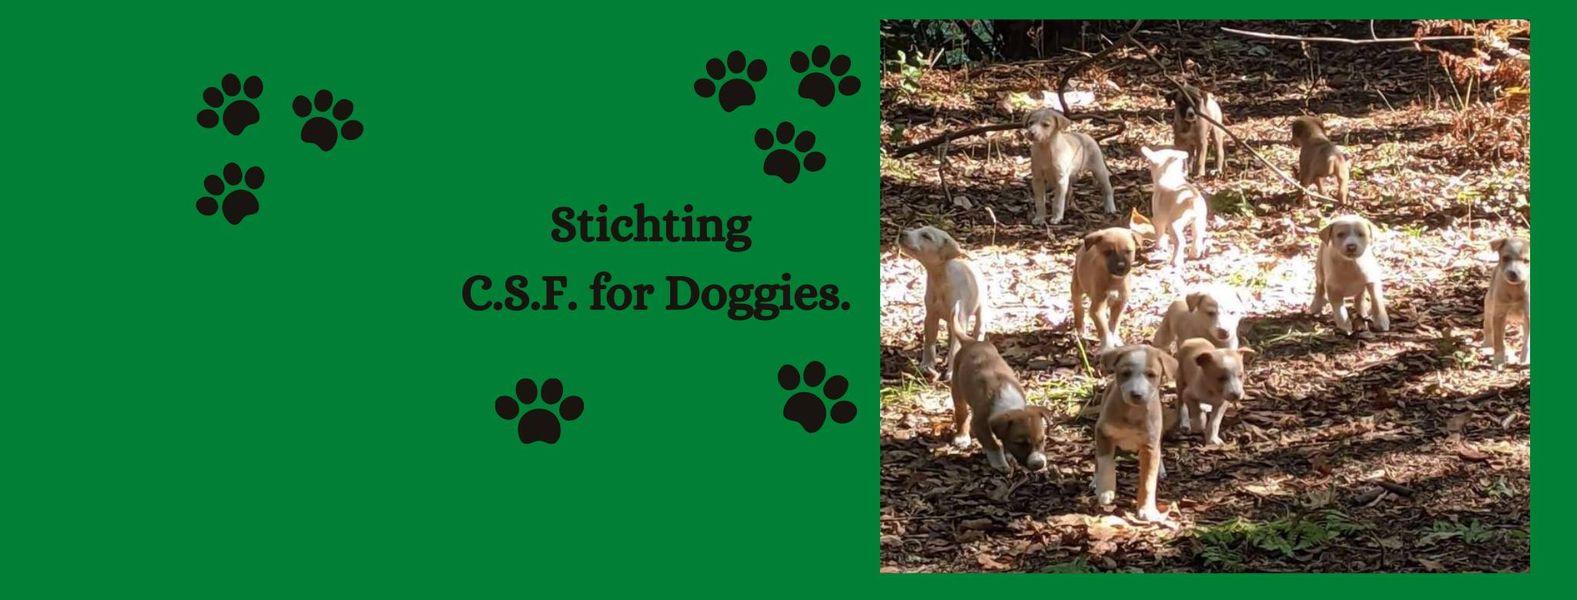 STICHTING C.S.F. FOR DOGGIES